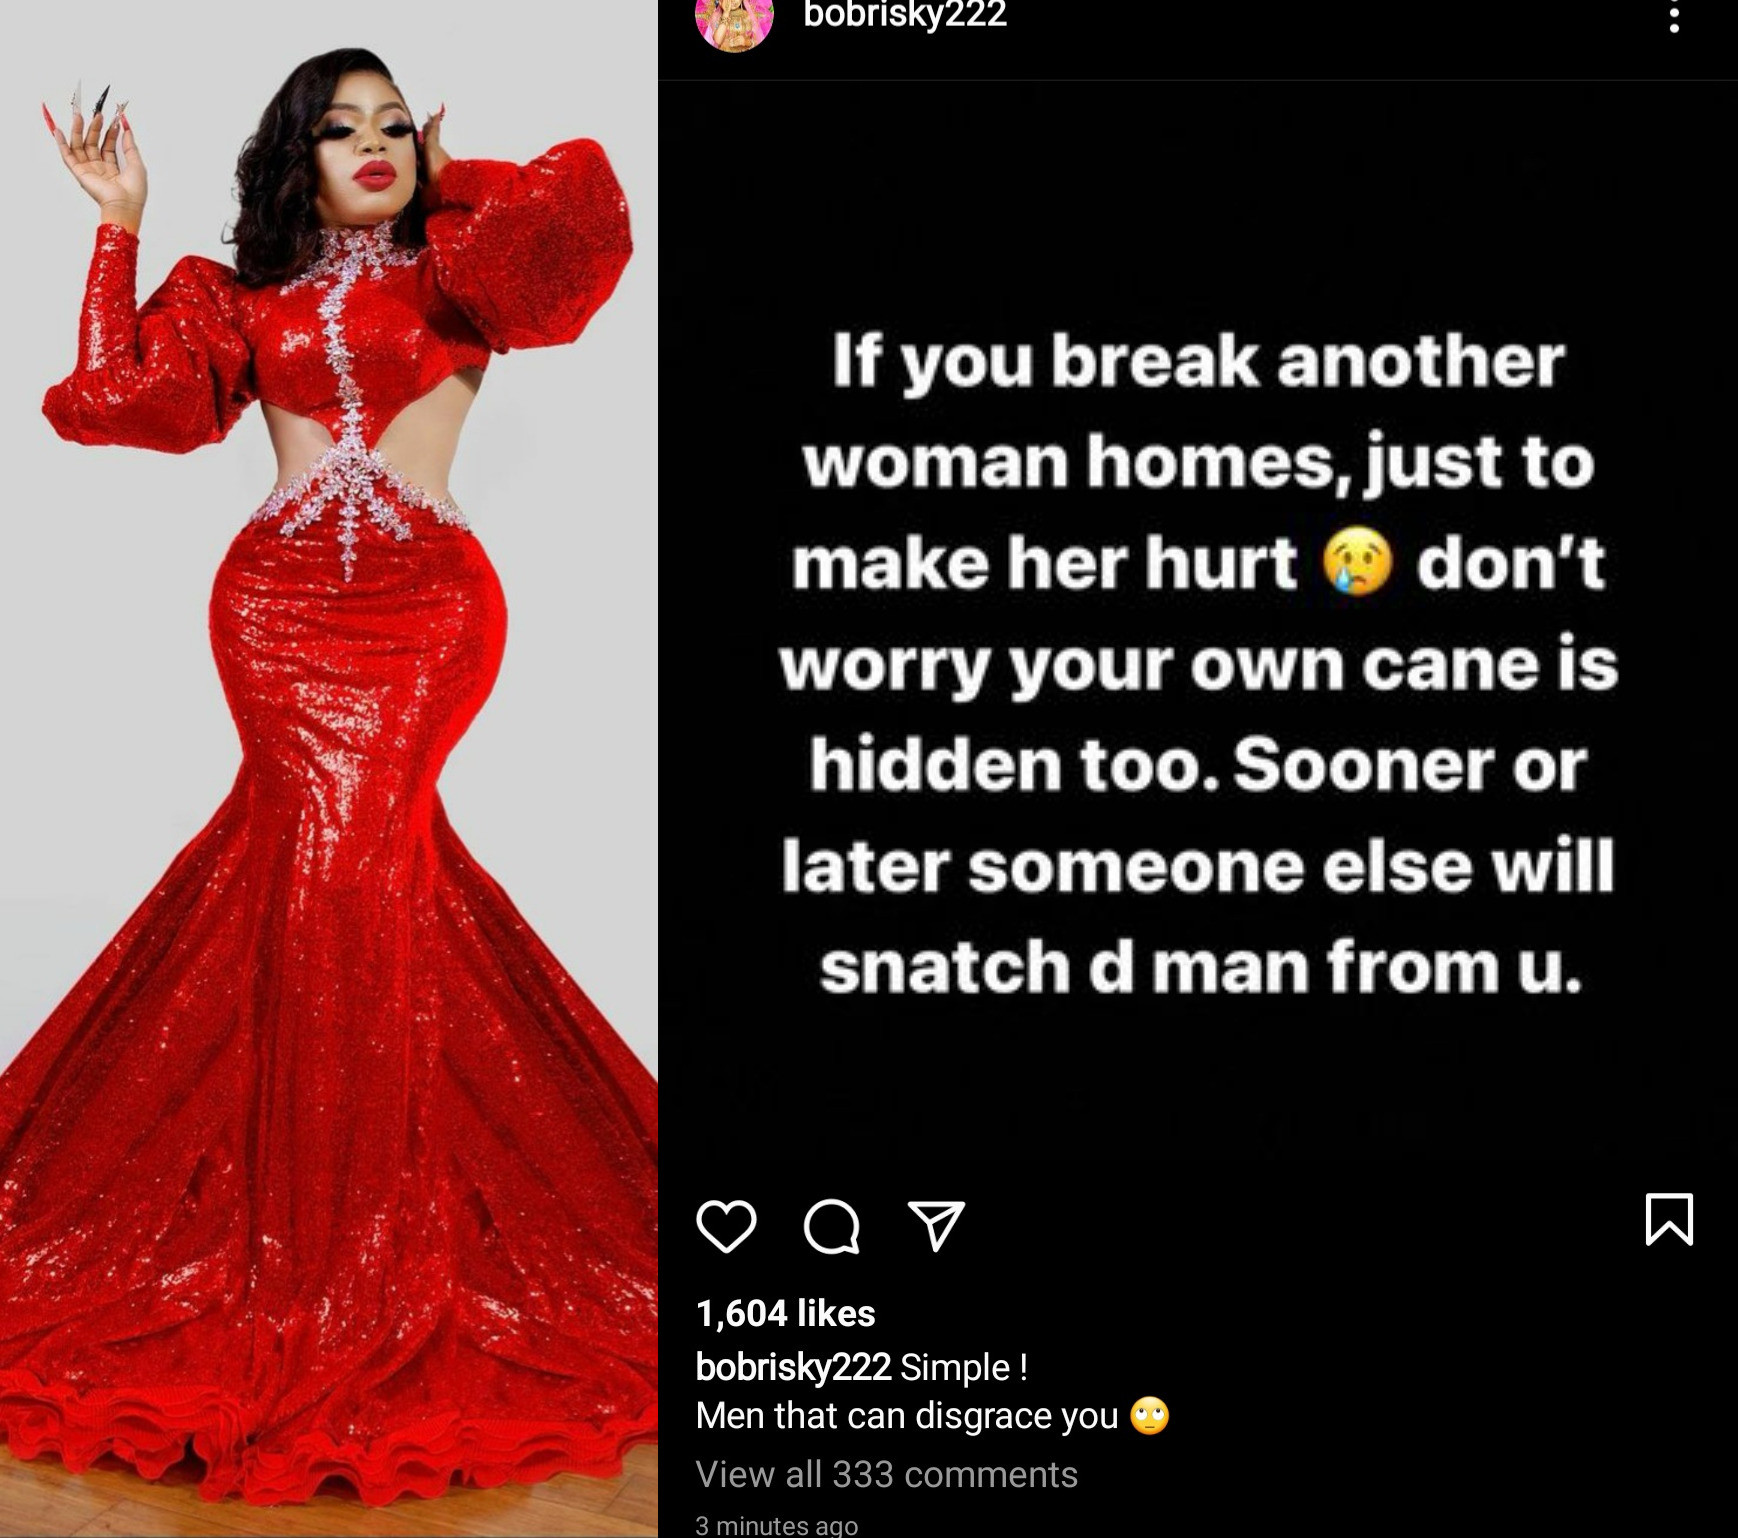 If you break another woman's home, sooner or later someone else will snatch the man from you," Bobrisky warns Afro News Wire